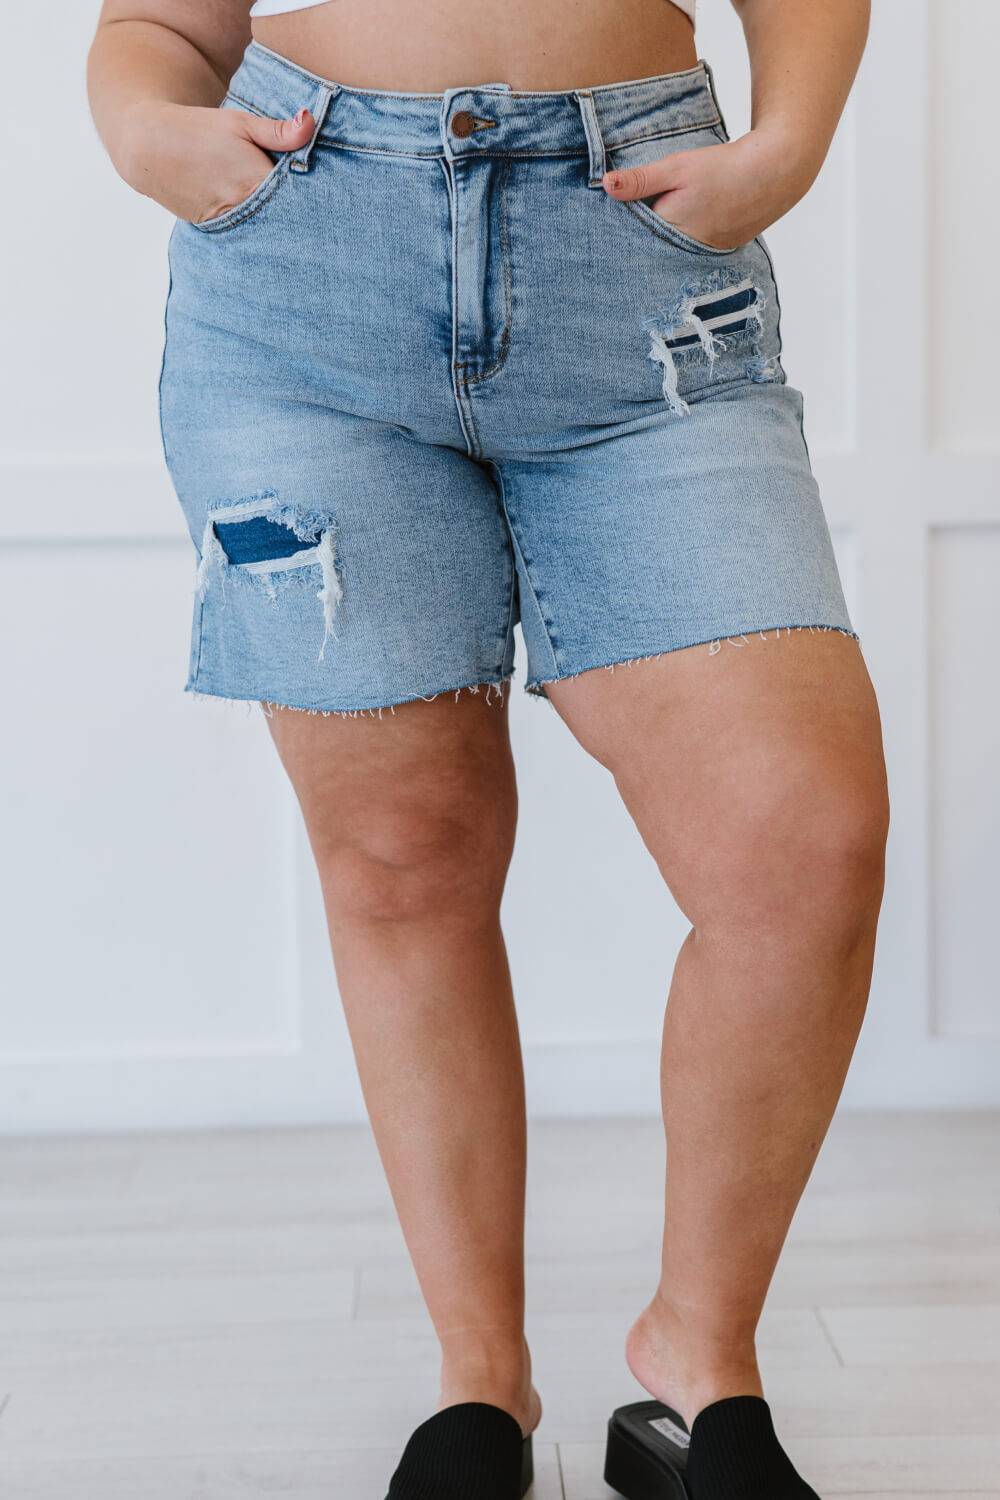 Plus Size, Judy Blue, Acid Wash Denim Patch High Rise Mid Thigh Shorts. Style Number 150094